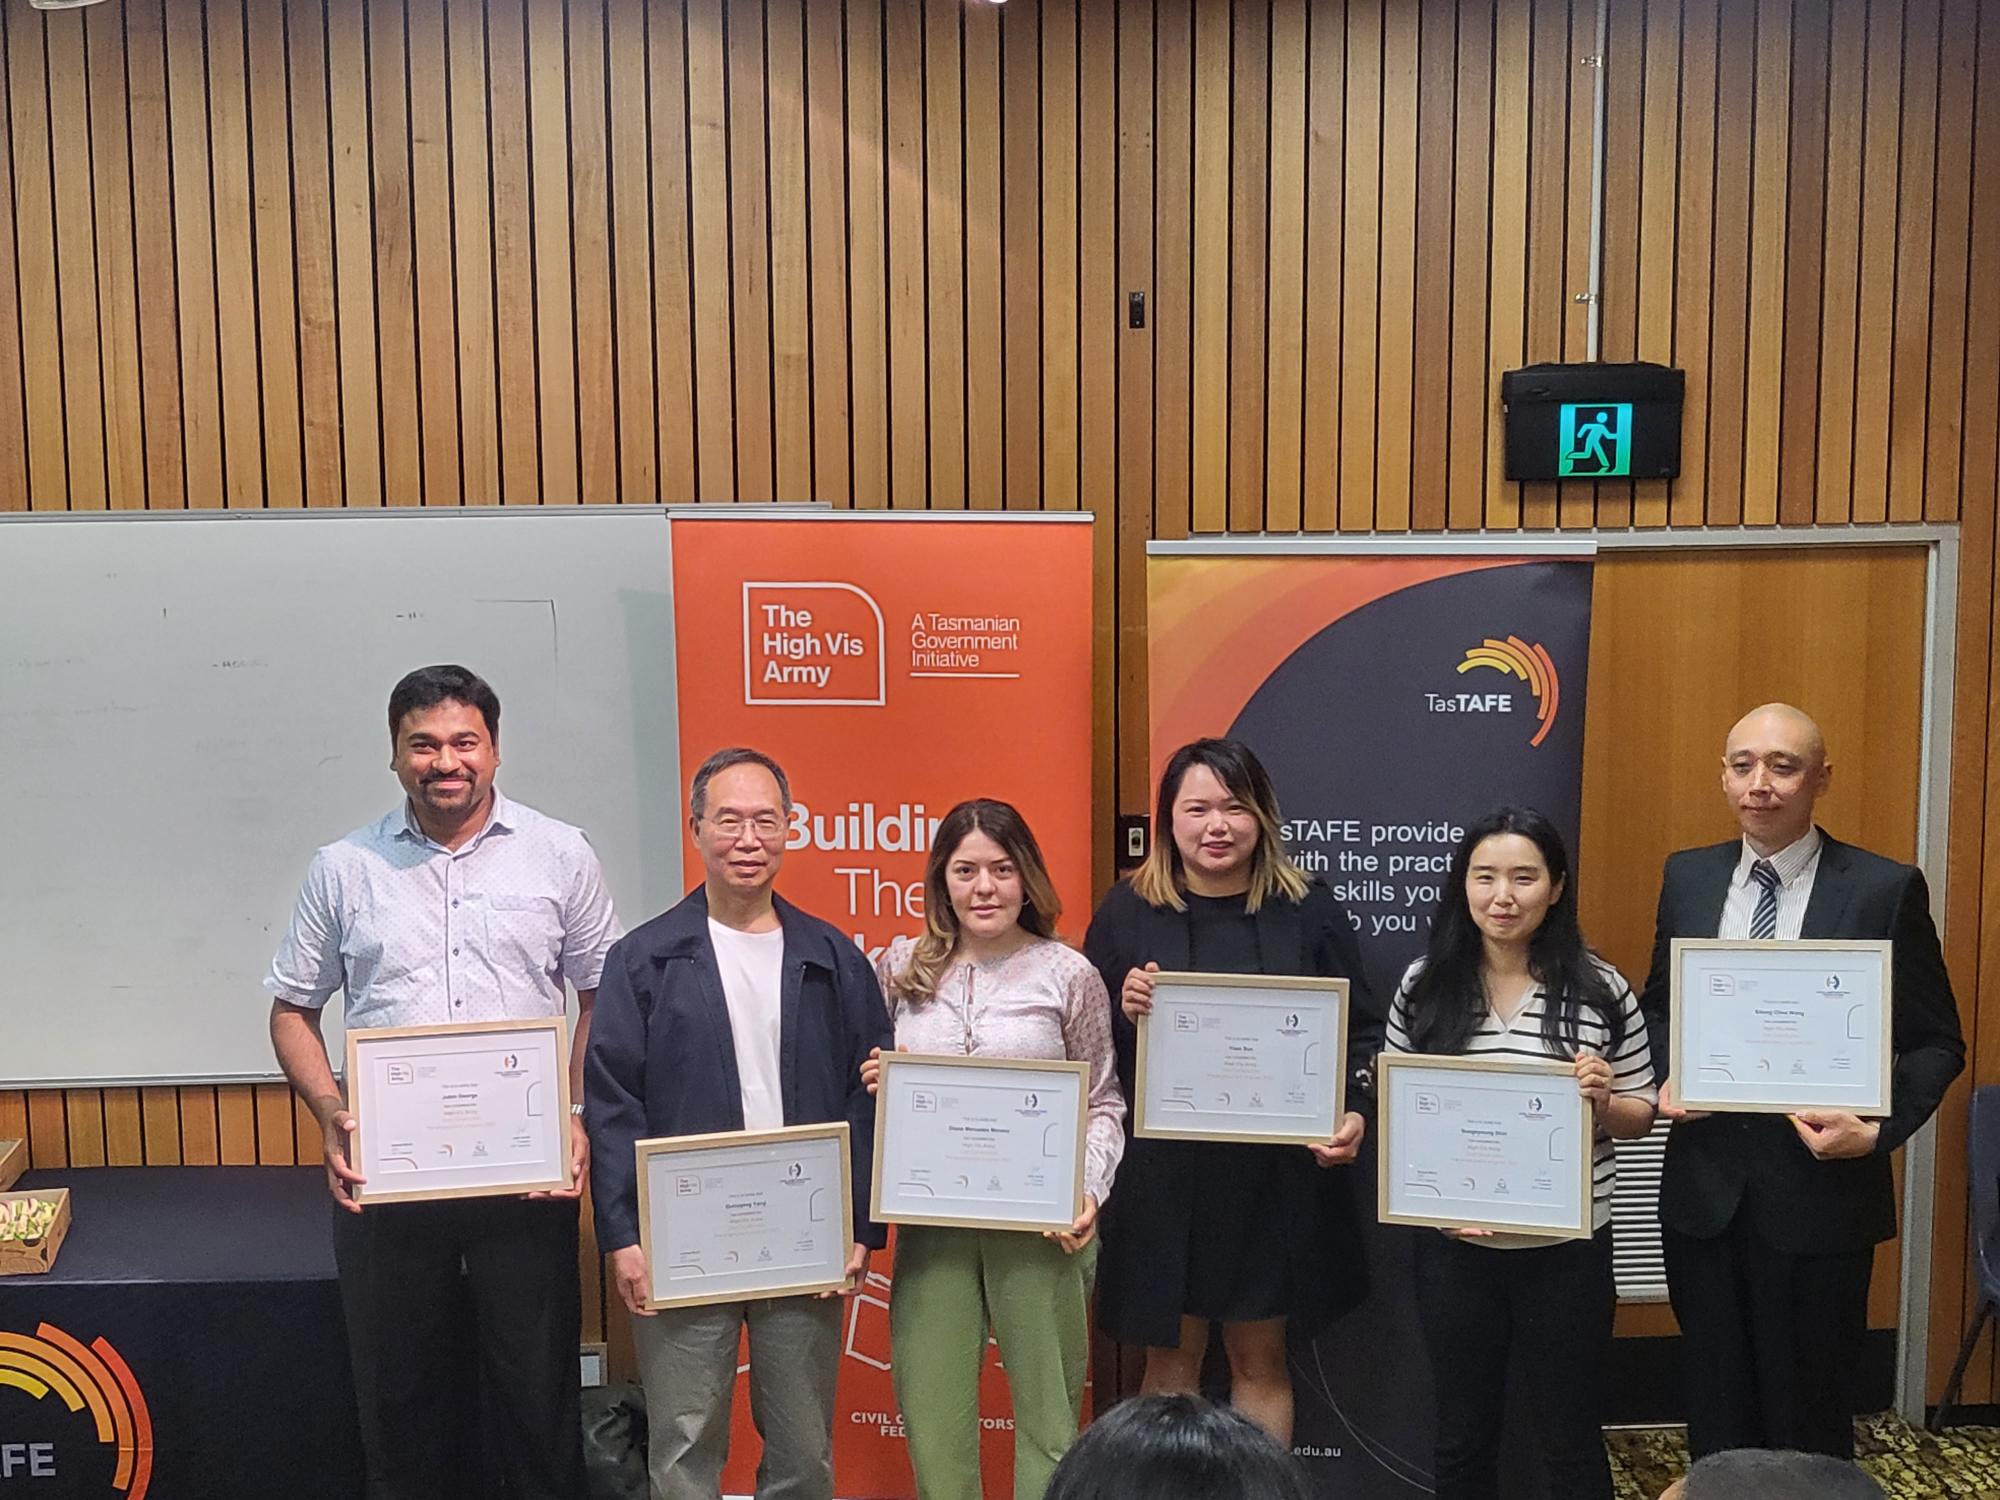 6 people holding their certificates at the front of a lecture theater. 